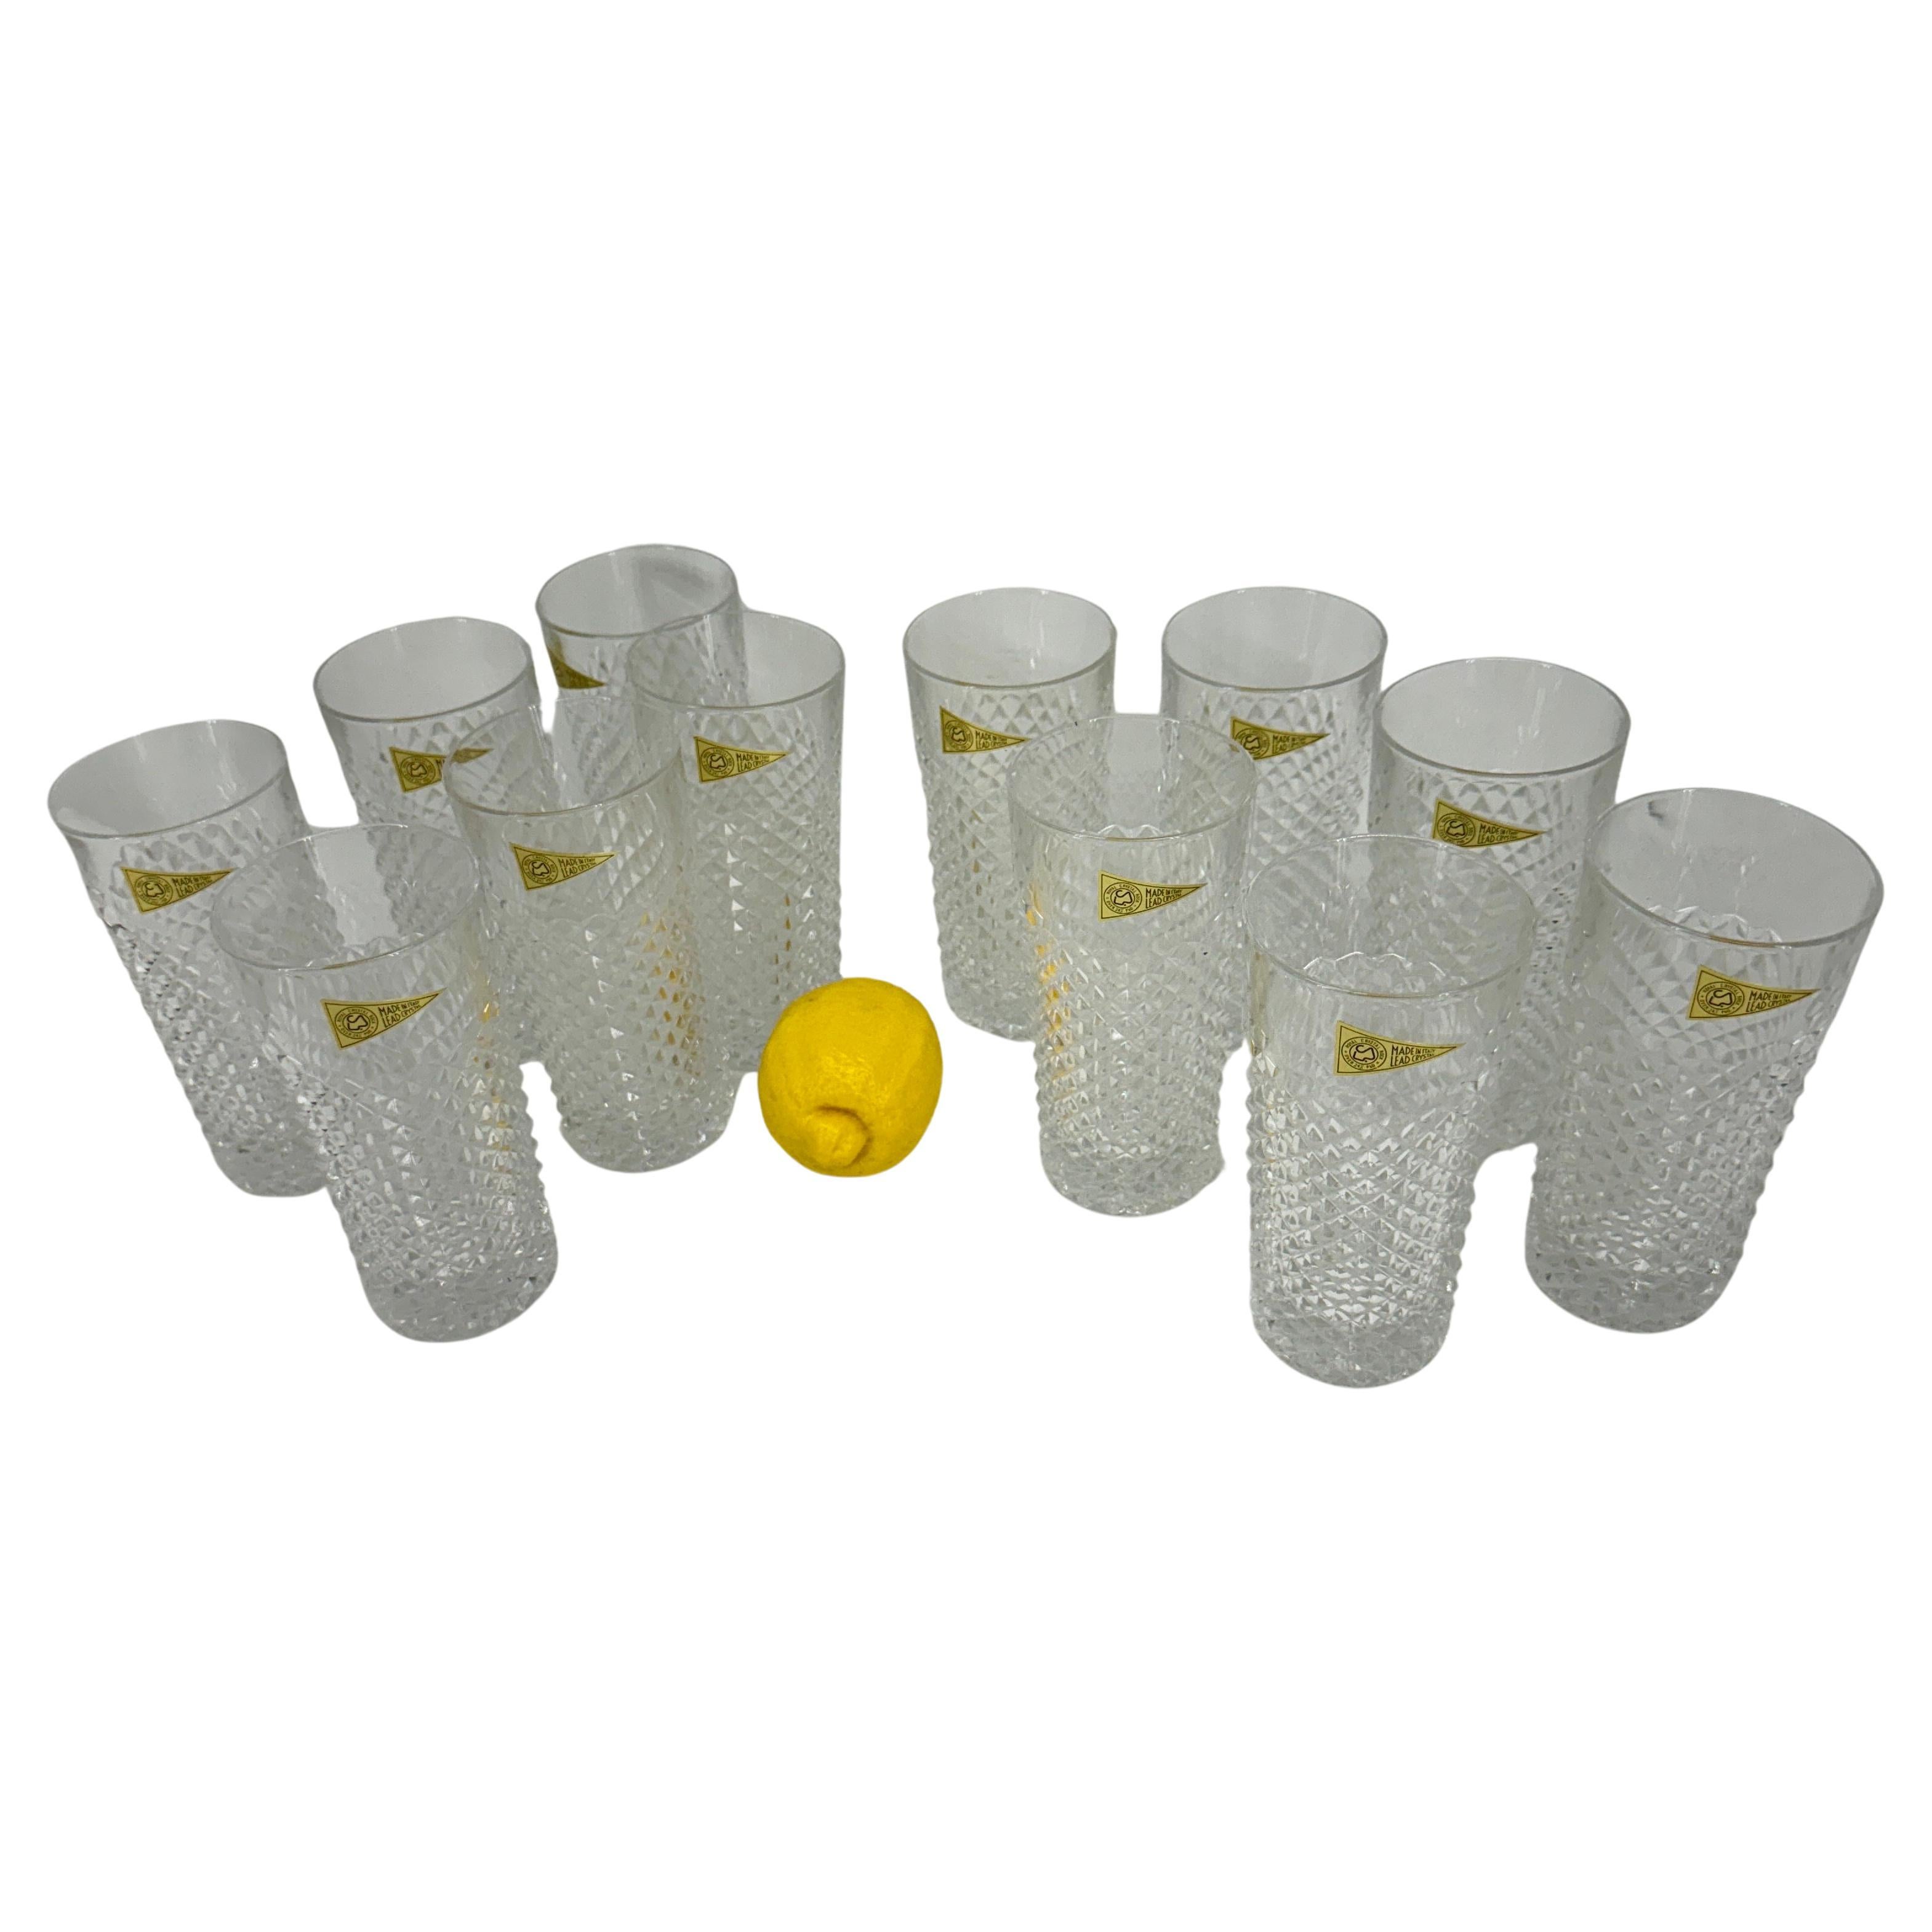 Set of 12 richly hand cut highball barware glasses, by Italian Royal Crystal Rock glassmaker. Each glass features deep cuts that allows the light to retract and shine to a brilliant finish from any angle.
Each glass is in very good condition.